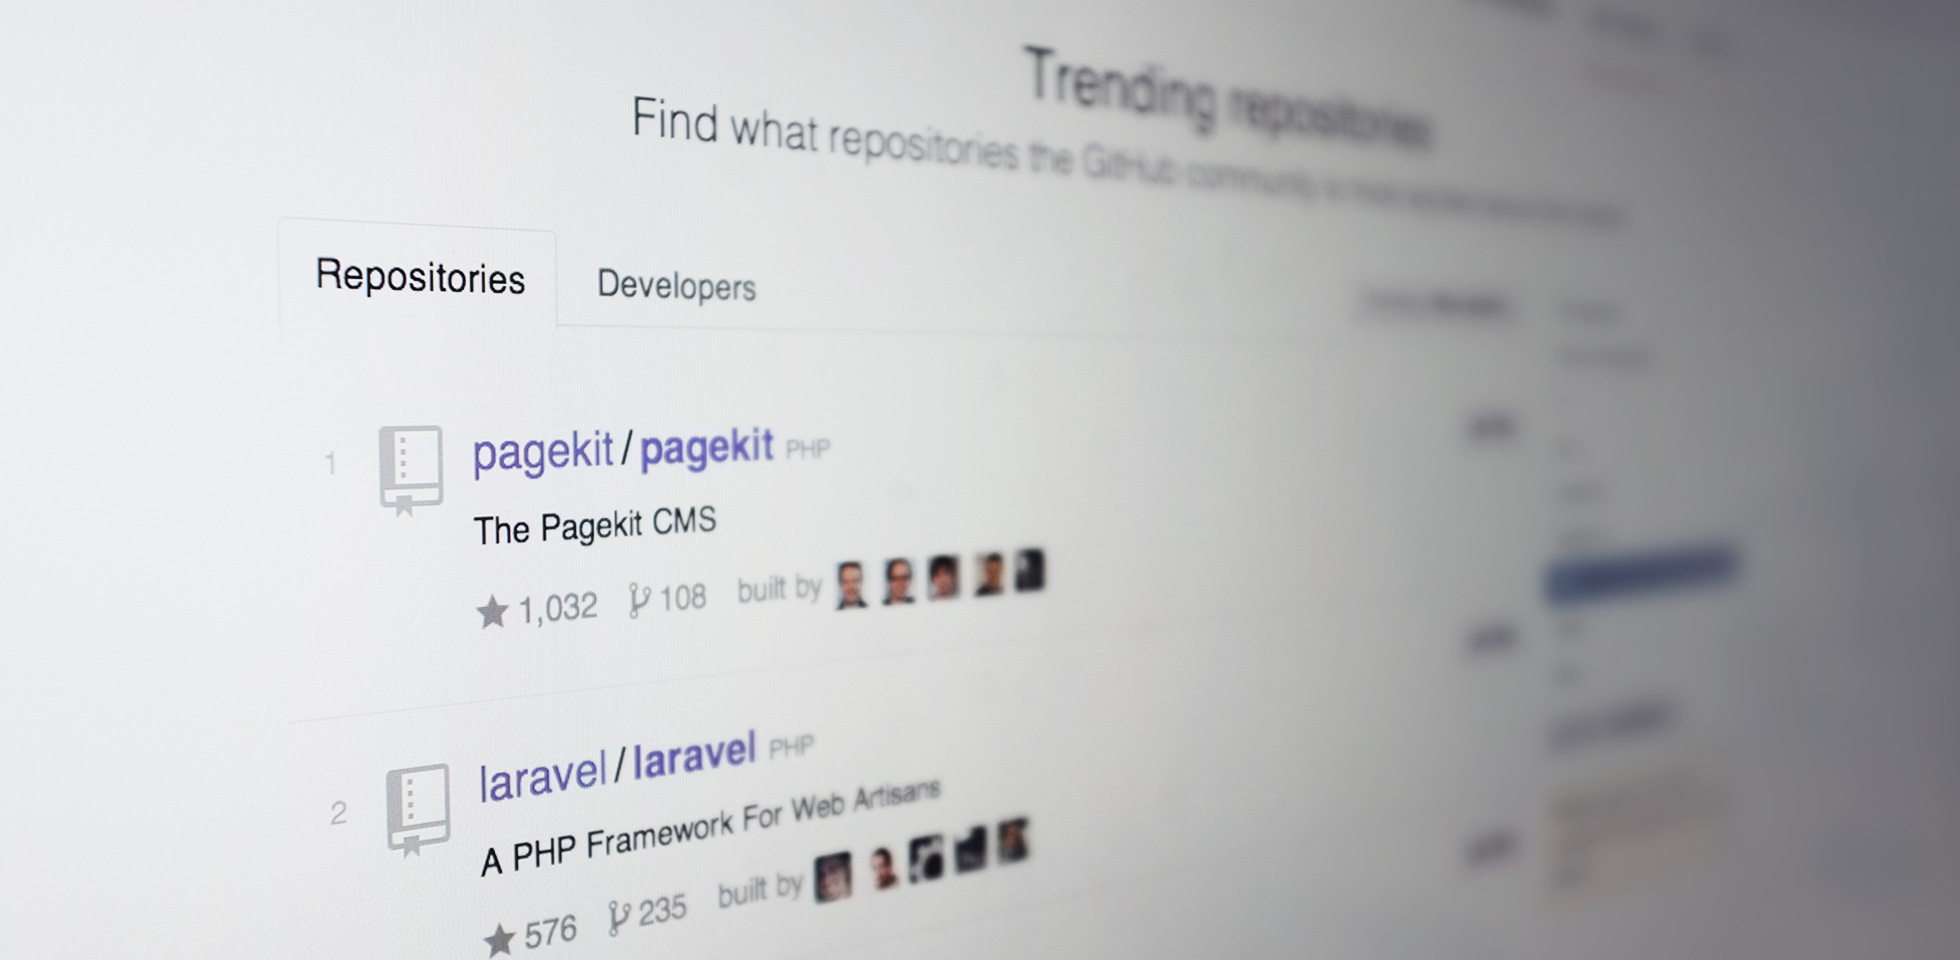 Pagekit is the most trending PHP project on Github